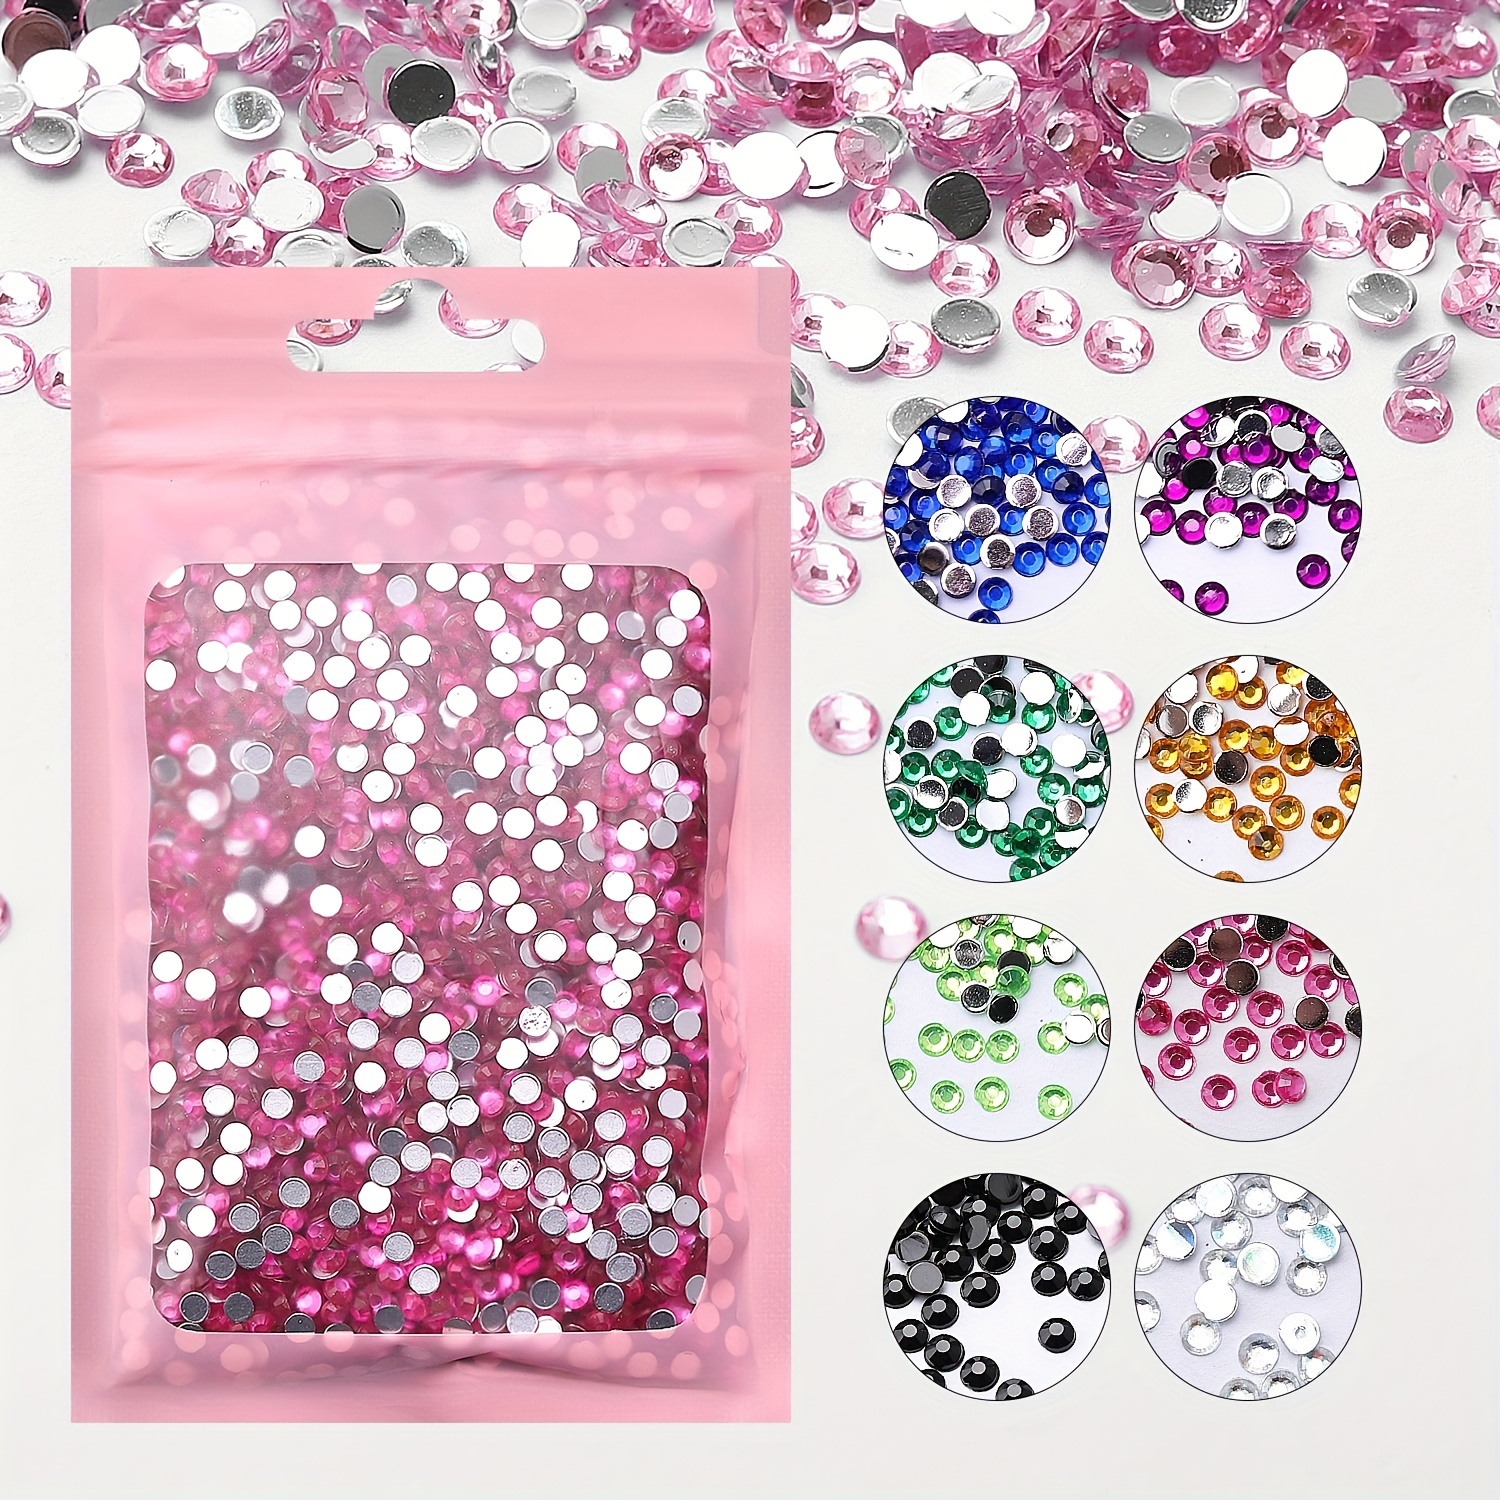 Lifextol Rhinestones for Crafting Chunky Glitter for Crafts and Rhinestones  with Tweezers 4Set Fine Glitter with 4set Rhinestones Crafts,NailSetA